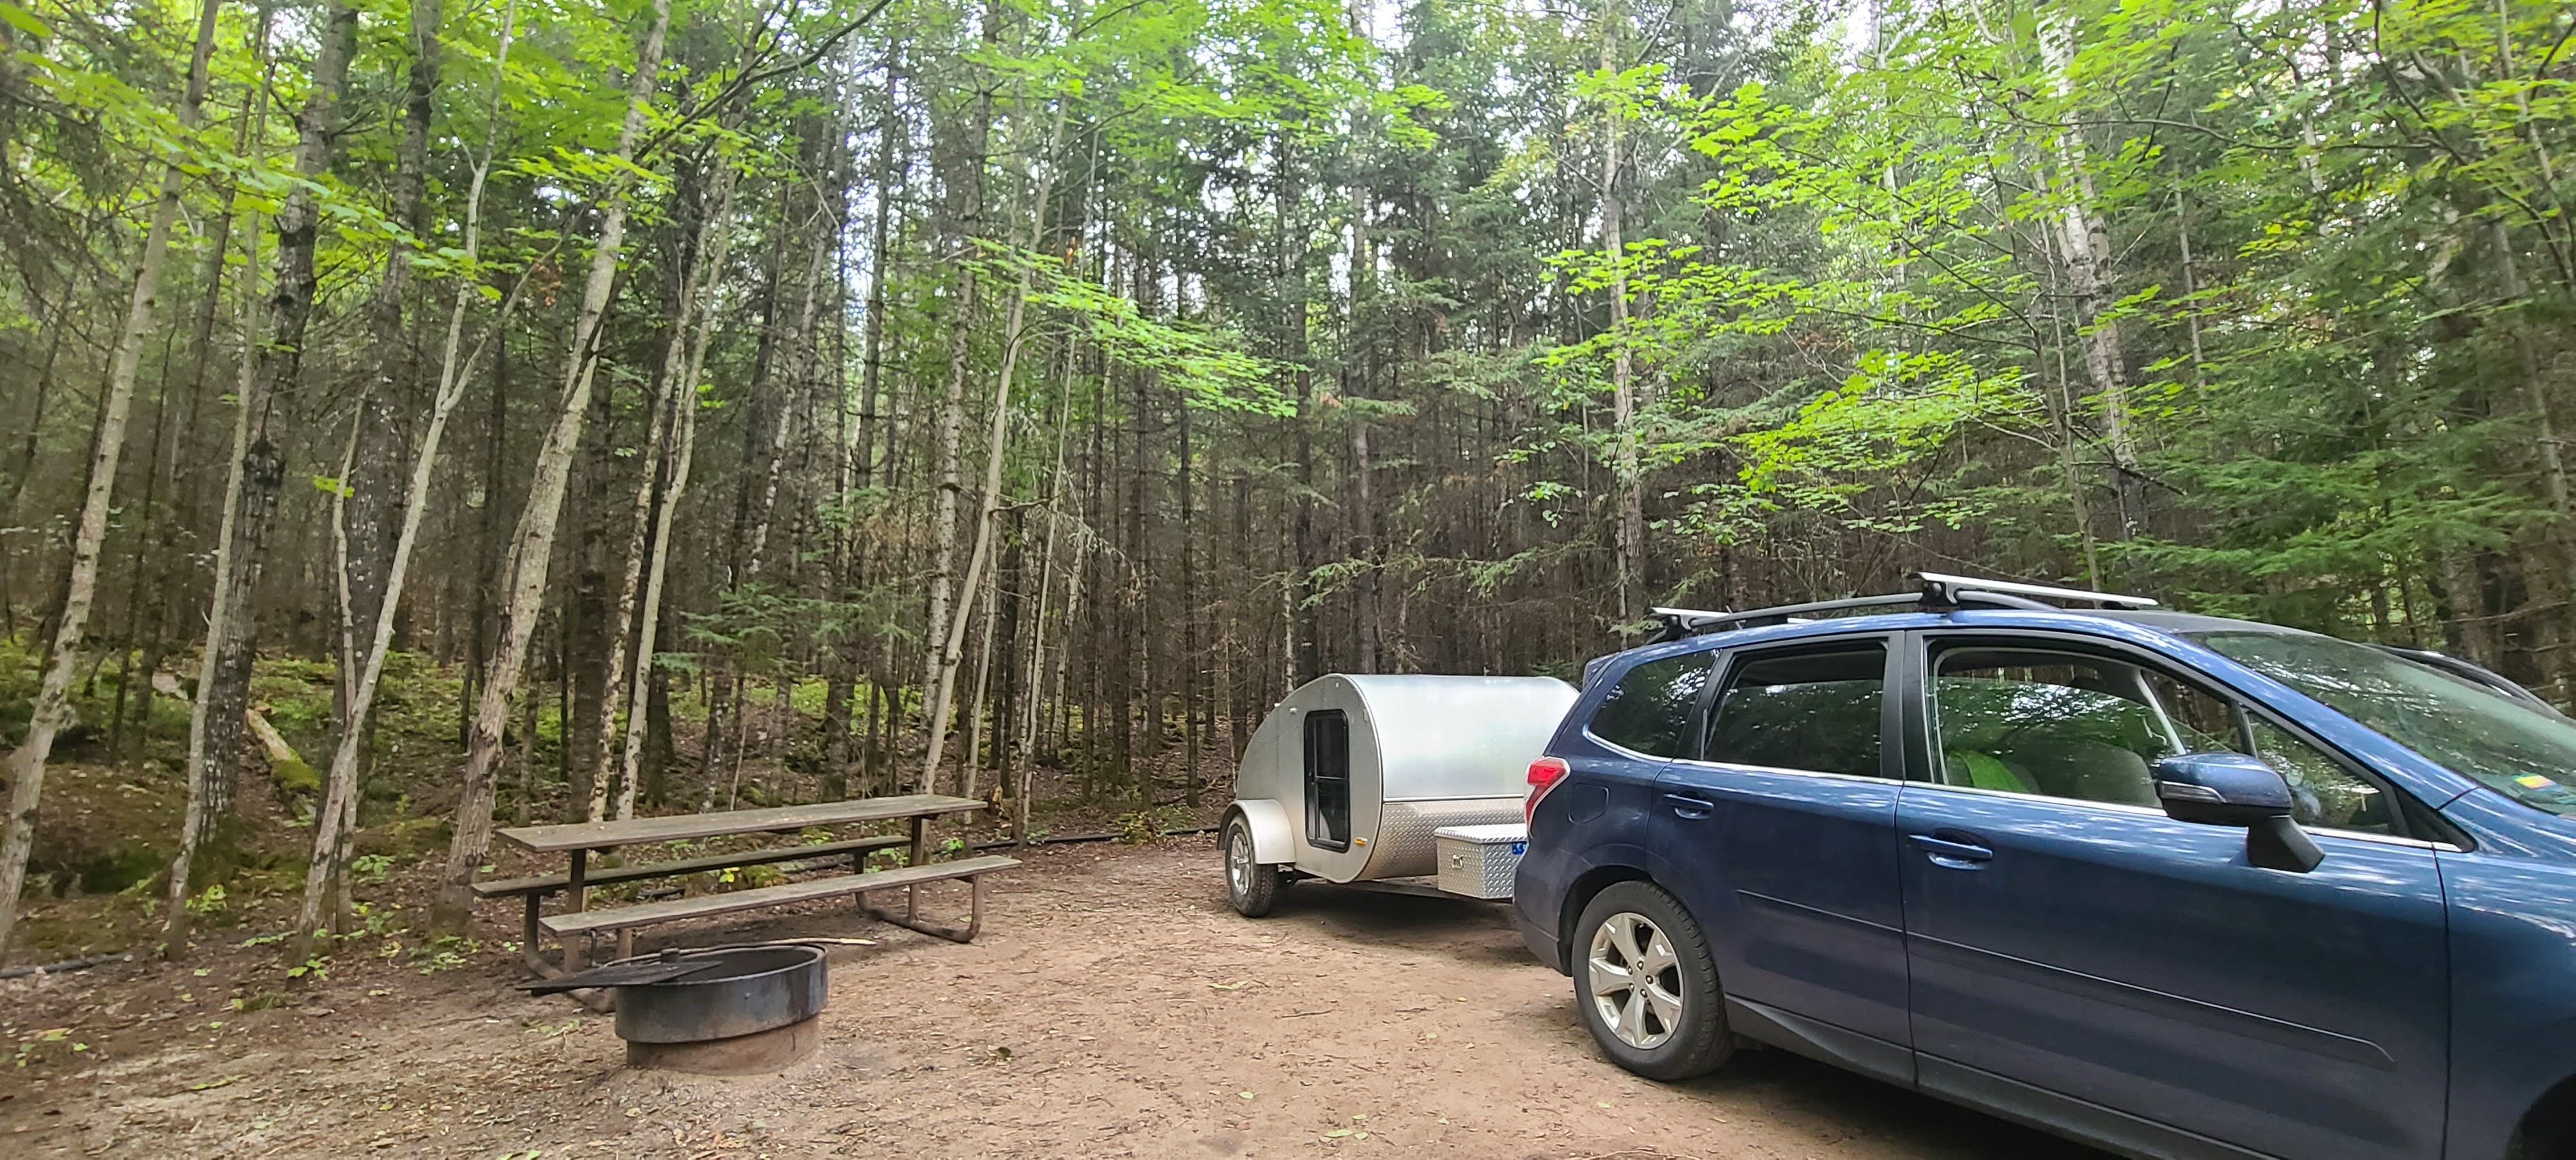 Camper submitted image from Woodenfrog Campground - 2